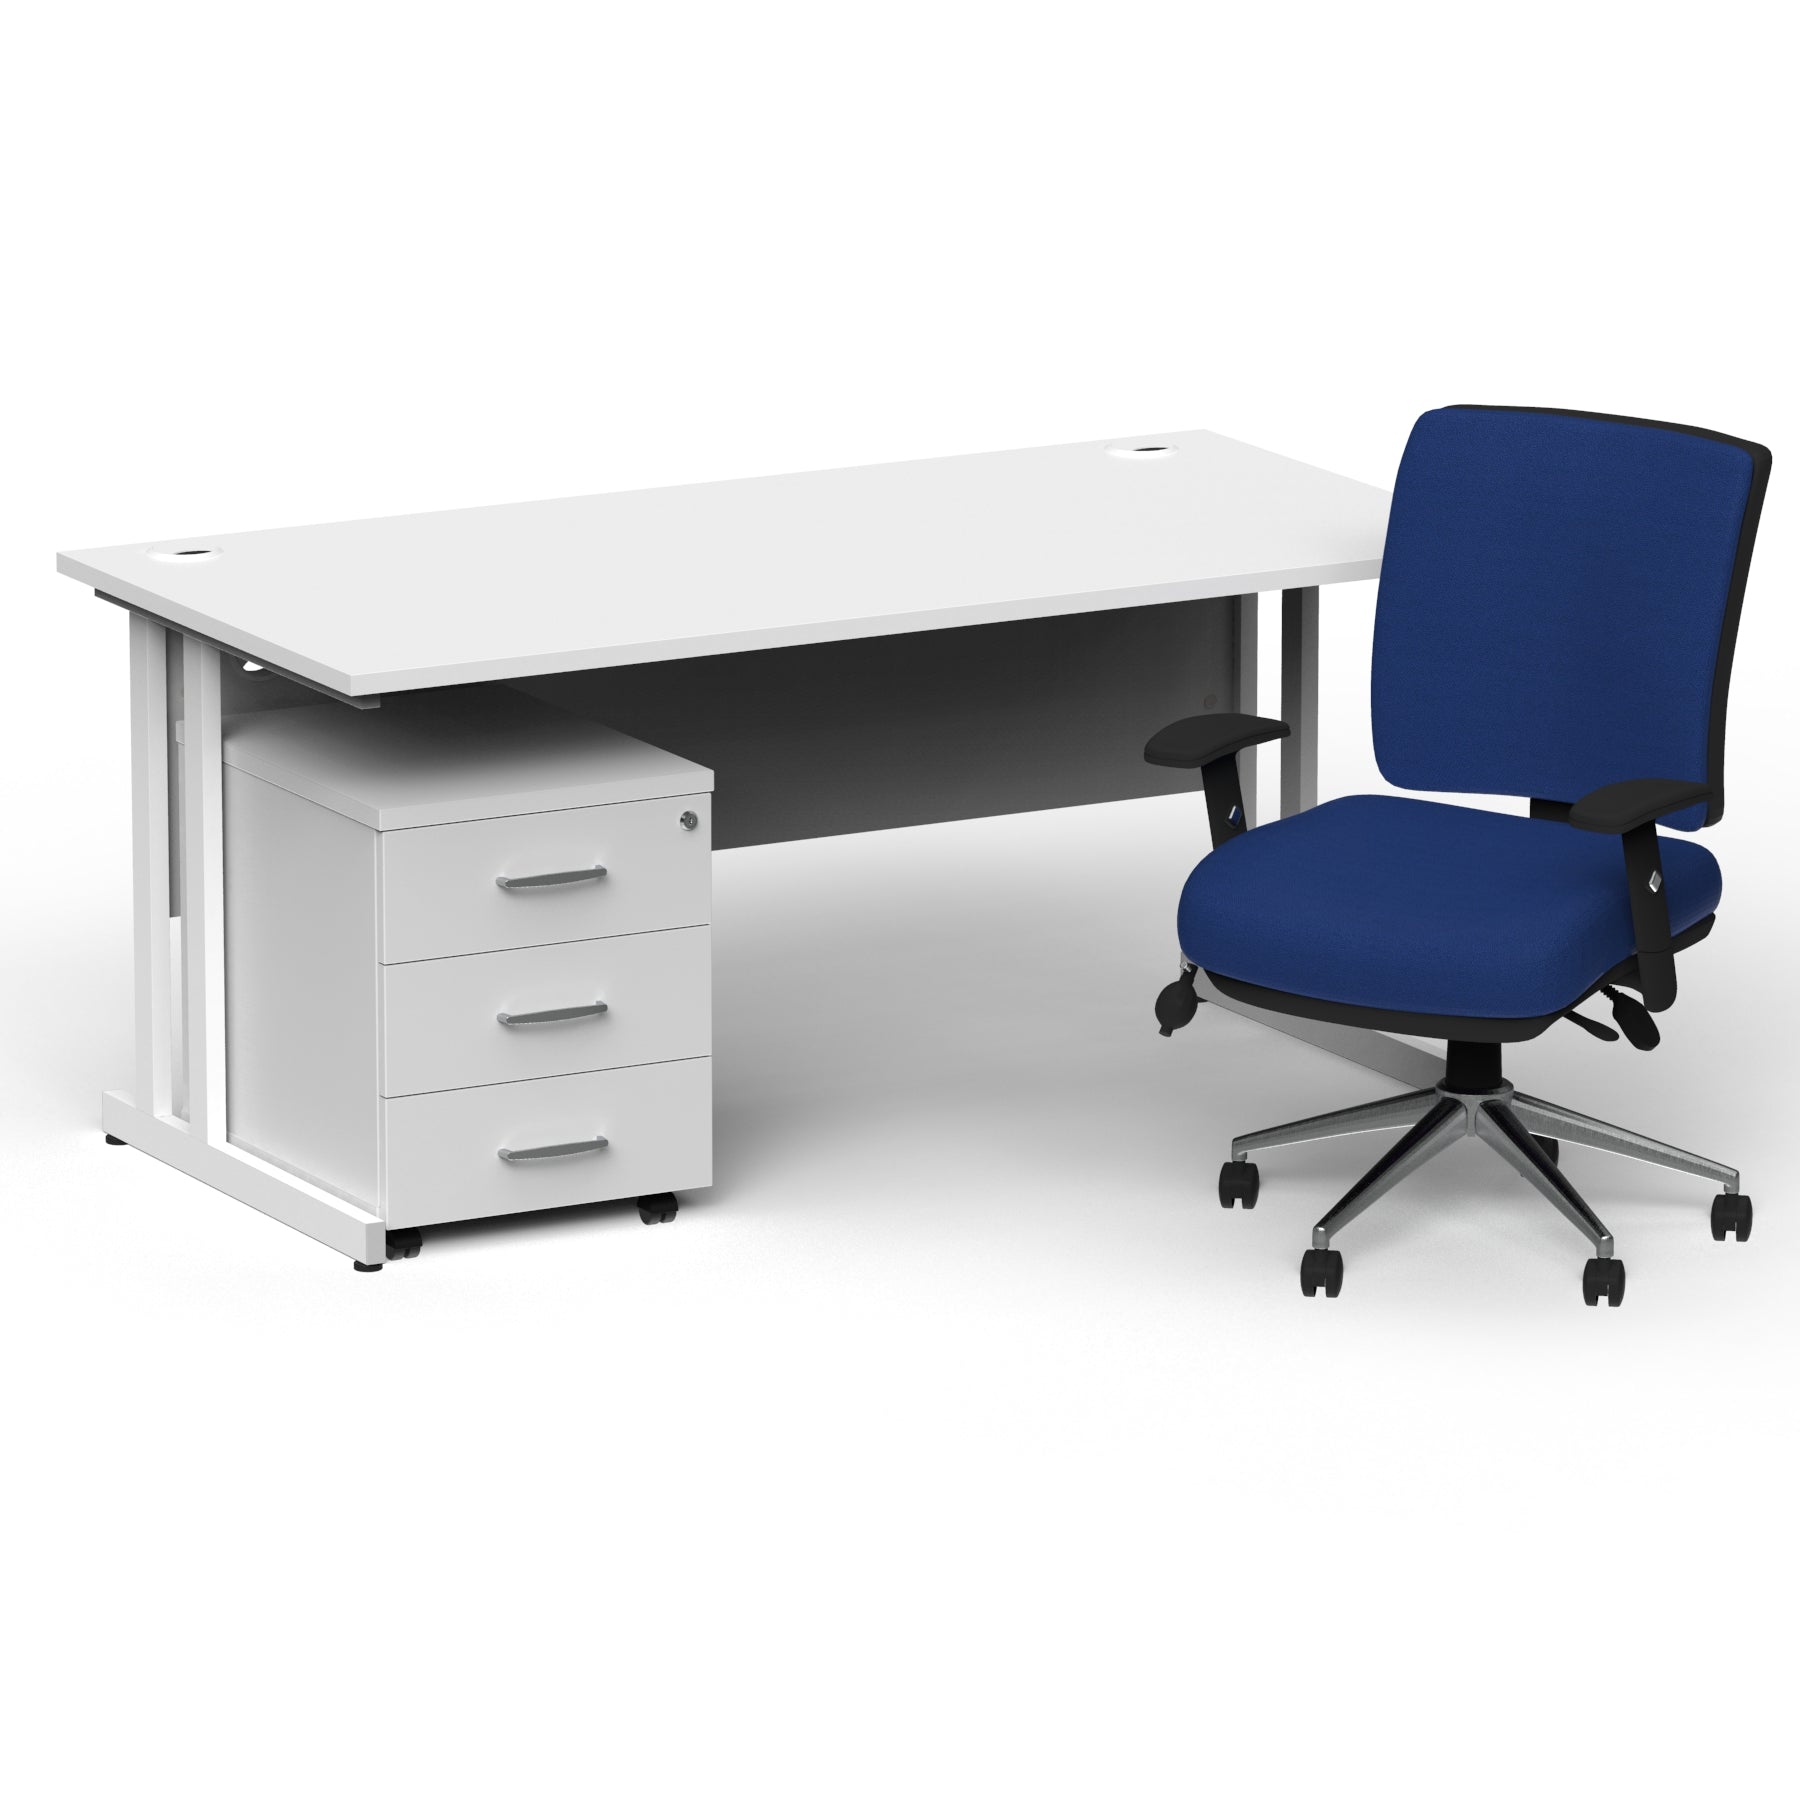 Impulse 1800mm Cantilever Straight Desk With Mobile Pedestal and Chiro Medium Back Blue Operator Chair